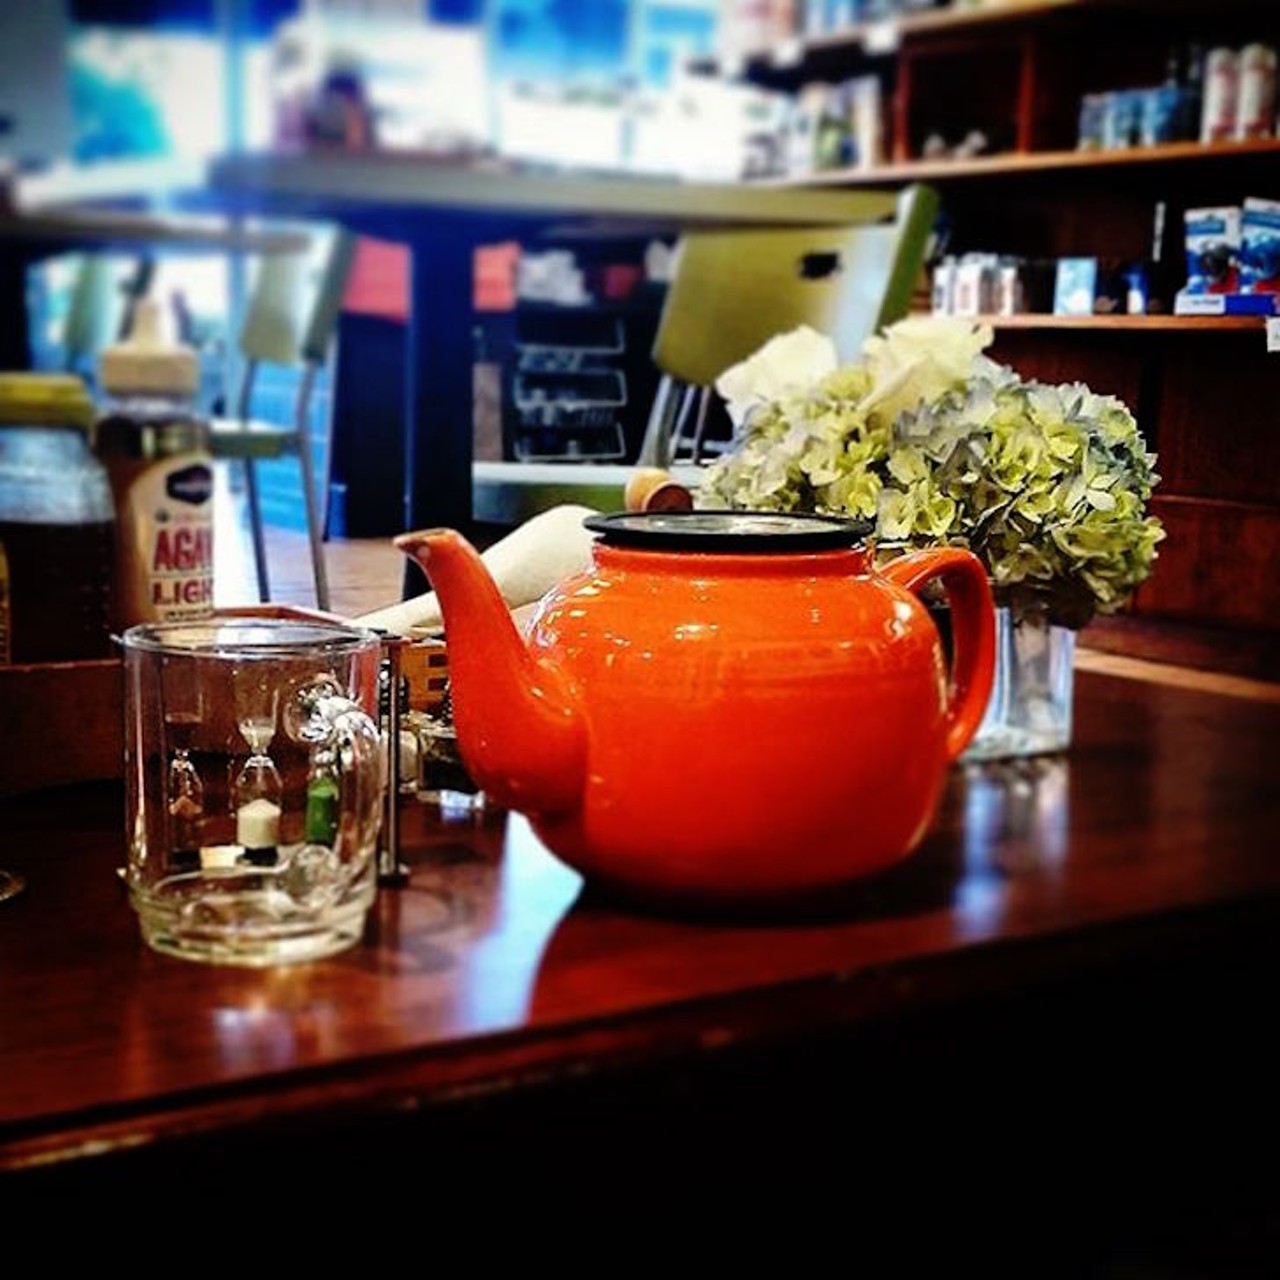 Infusion Tea
Feb. 13, 6:15 p.m. and 8:30 p.m.; $49
Meat isn&#146;t everyone&#146;s cup of tea, and this tea shop couldn&#146;t agree more. Settle in for a four-course vegan dinner, defined by its servings of pomegranate-kale salad and carrot osso buco. 
Photo via nowboarding_withjen/Instagram